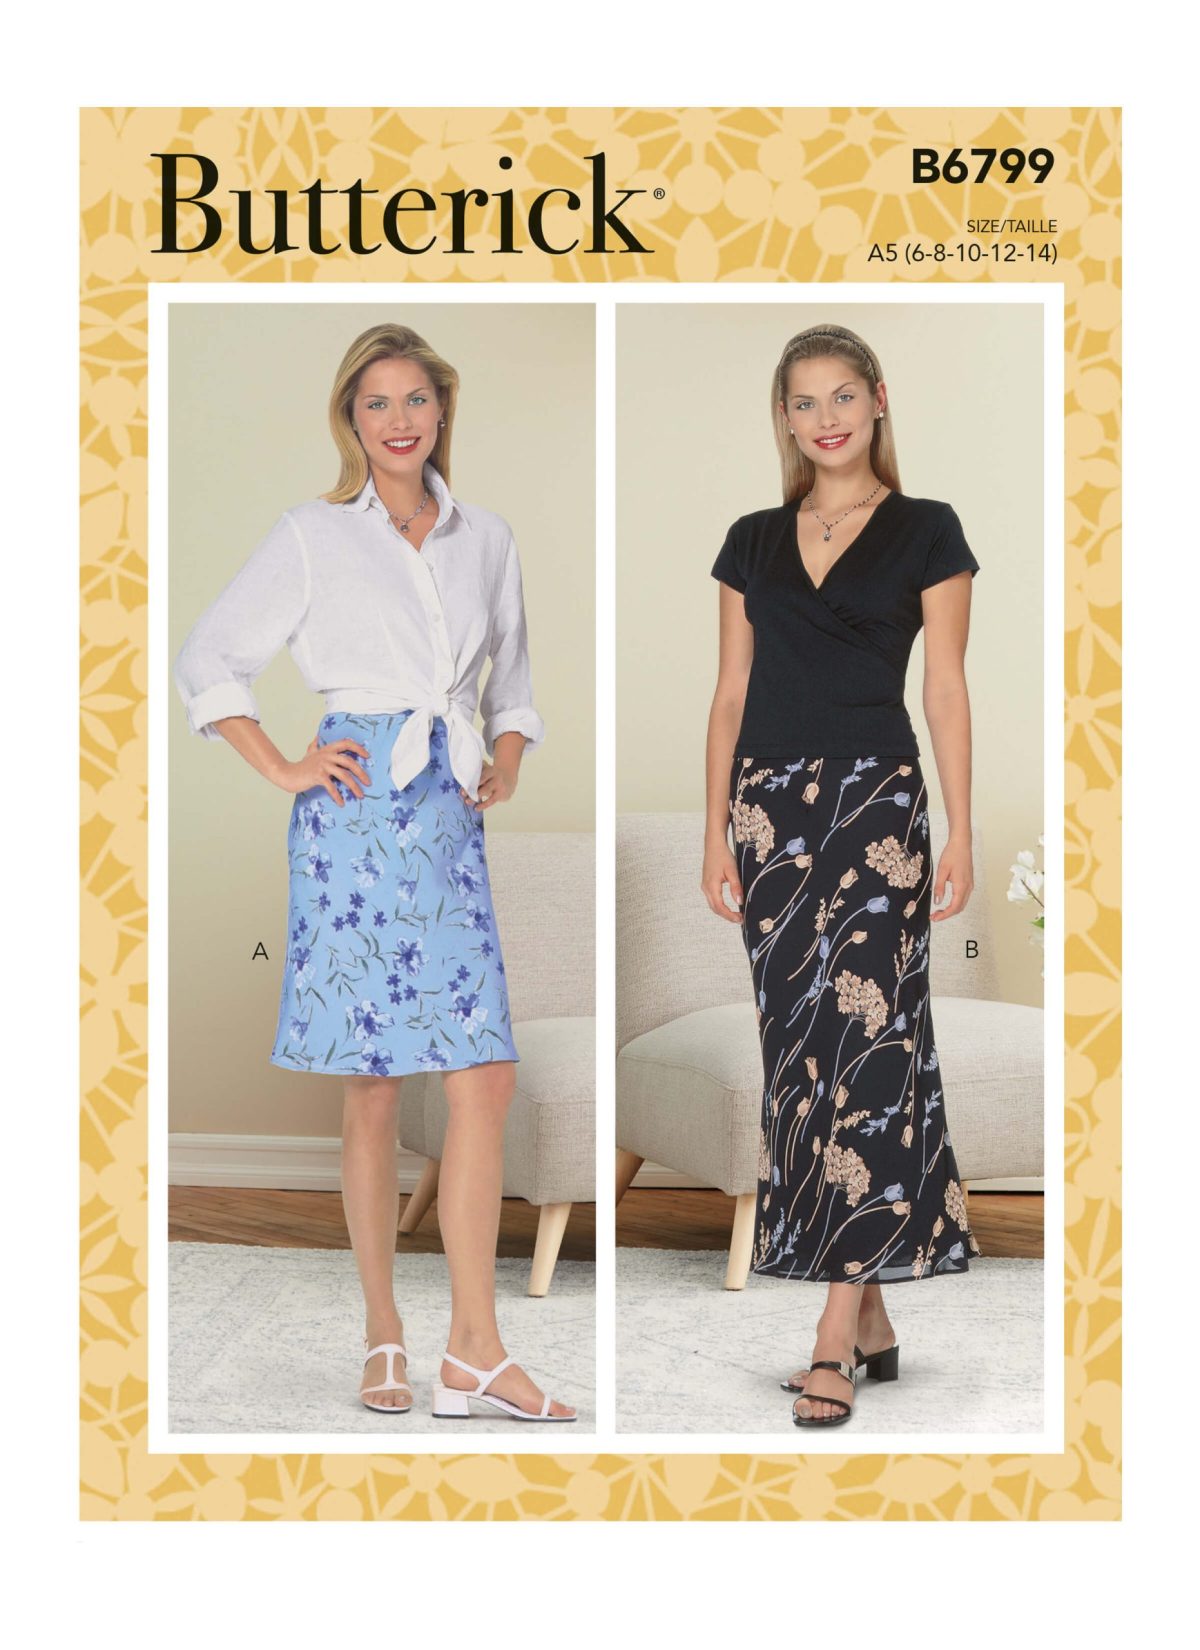 Butterick Sewing Pattern B6799 Misses' and Misses' Petite A-Line Bias Skirts